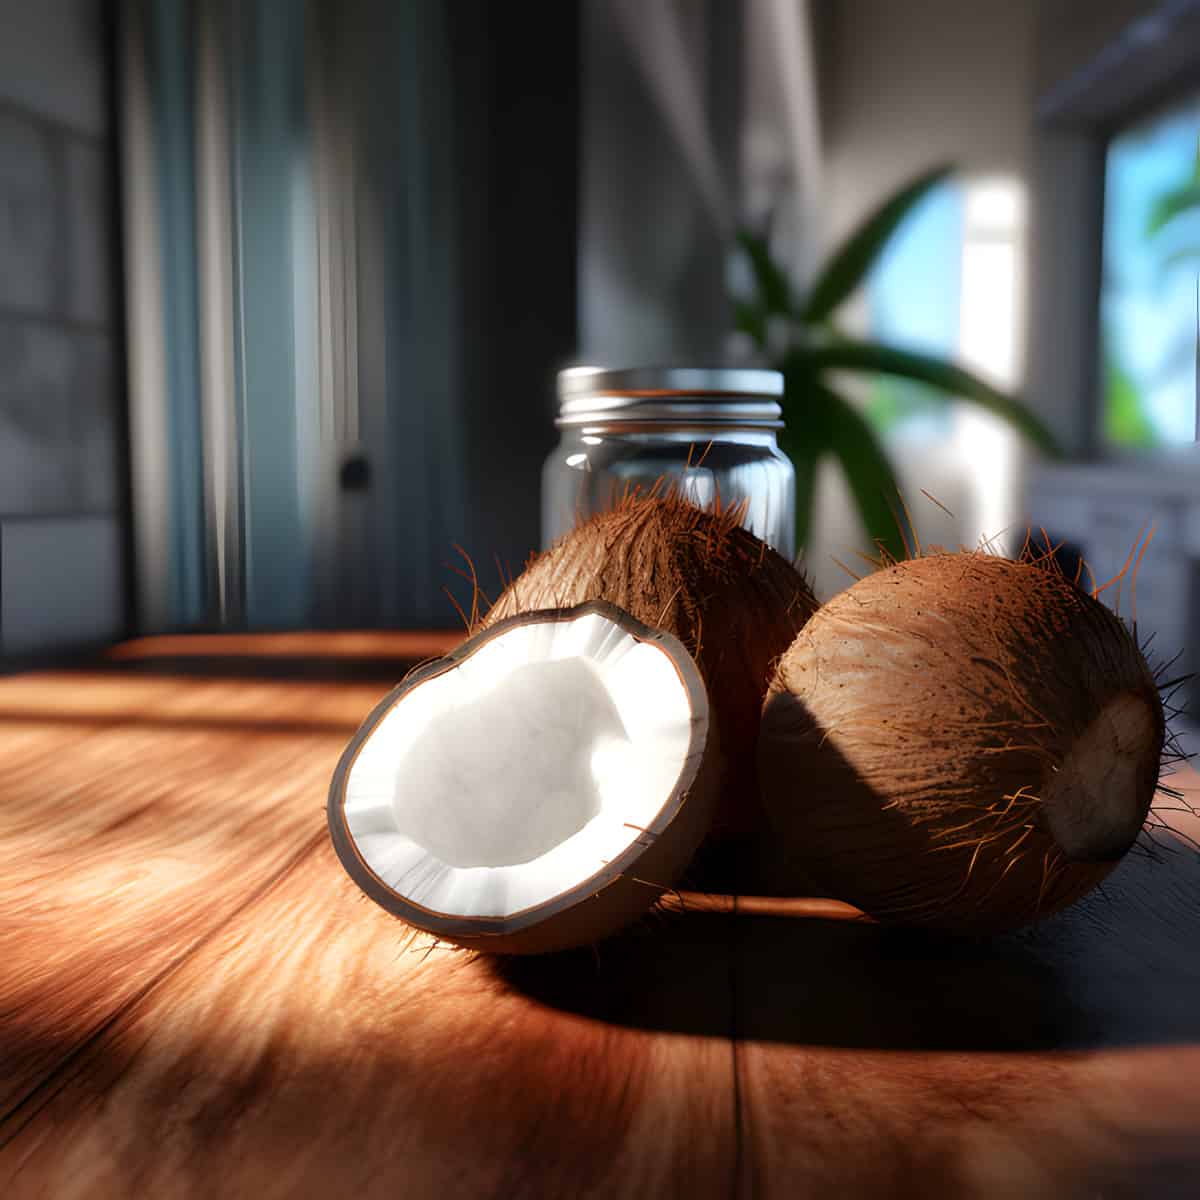 Coconut on a kitchen counter